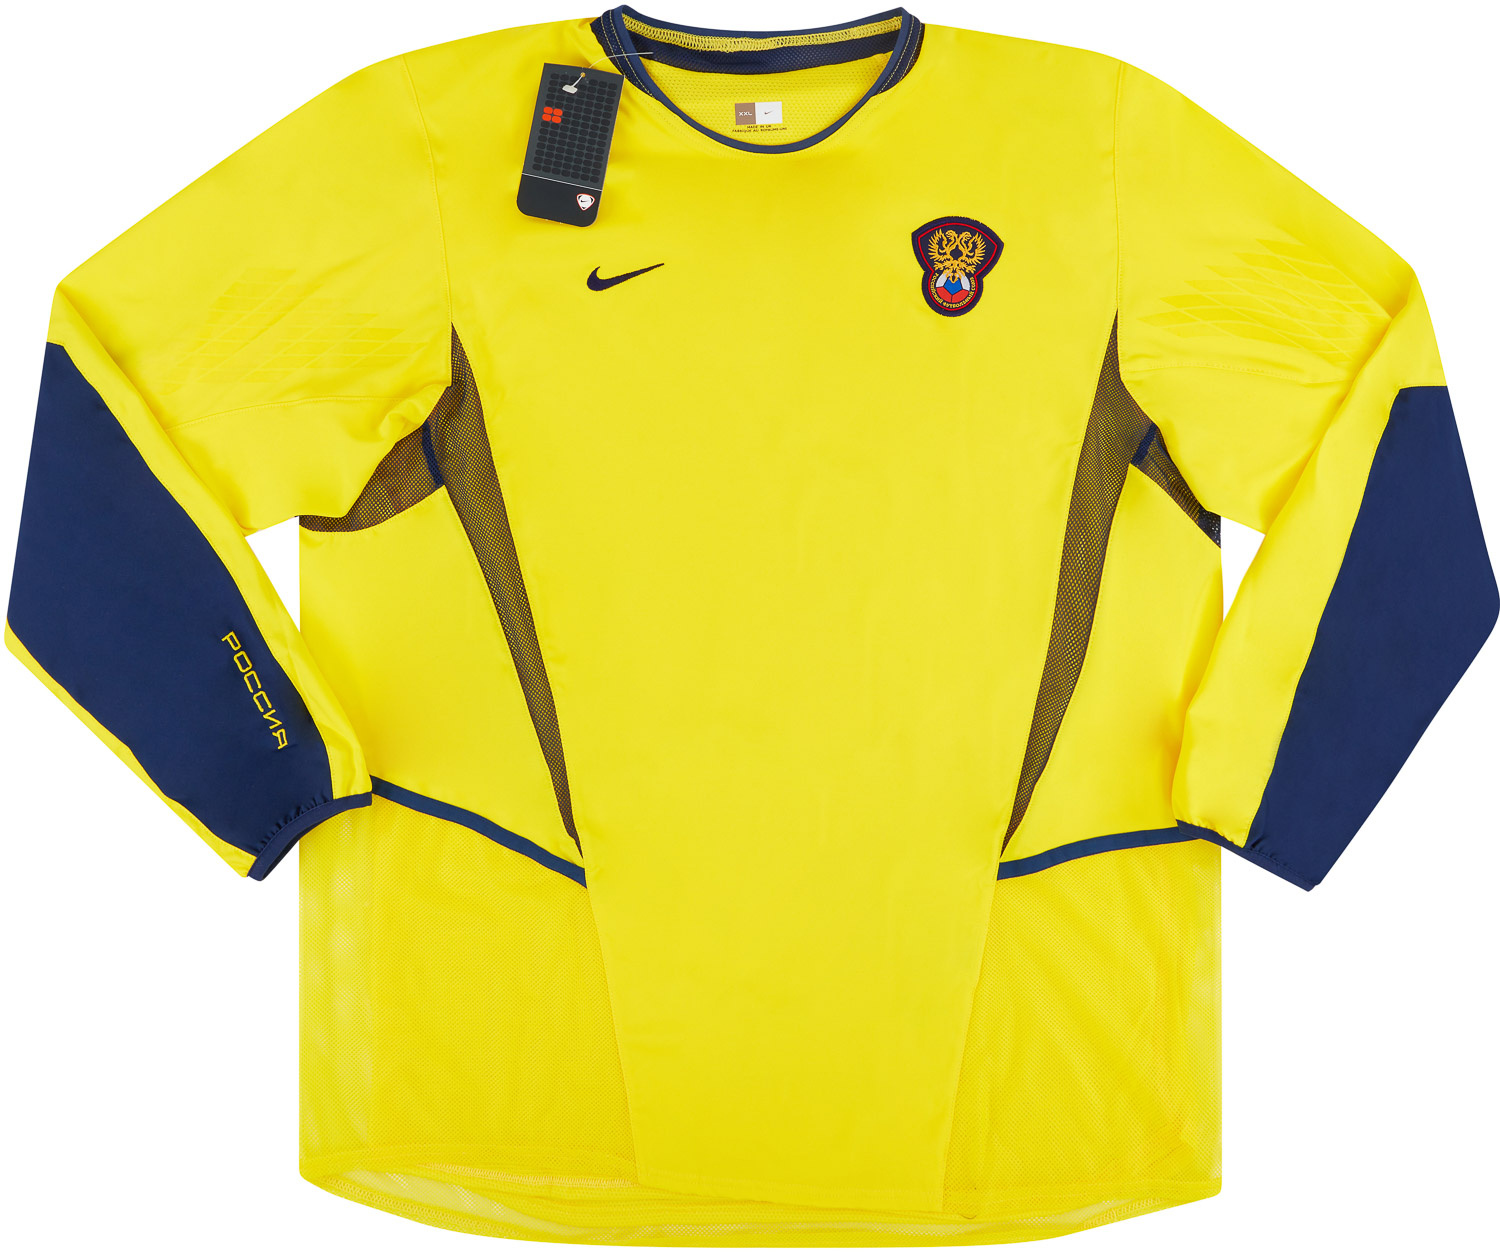 2002-04 Russia Player Issue GK Shirt ()